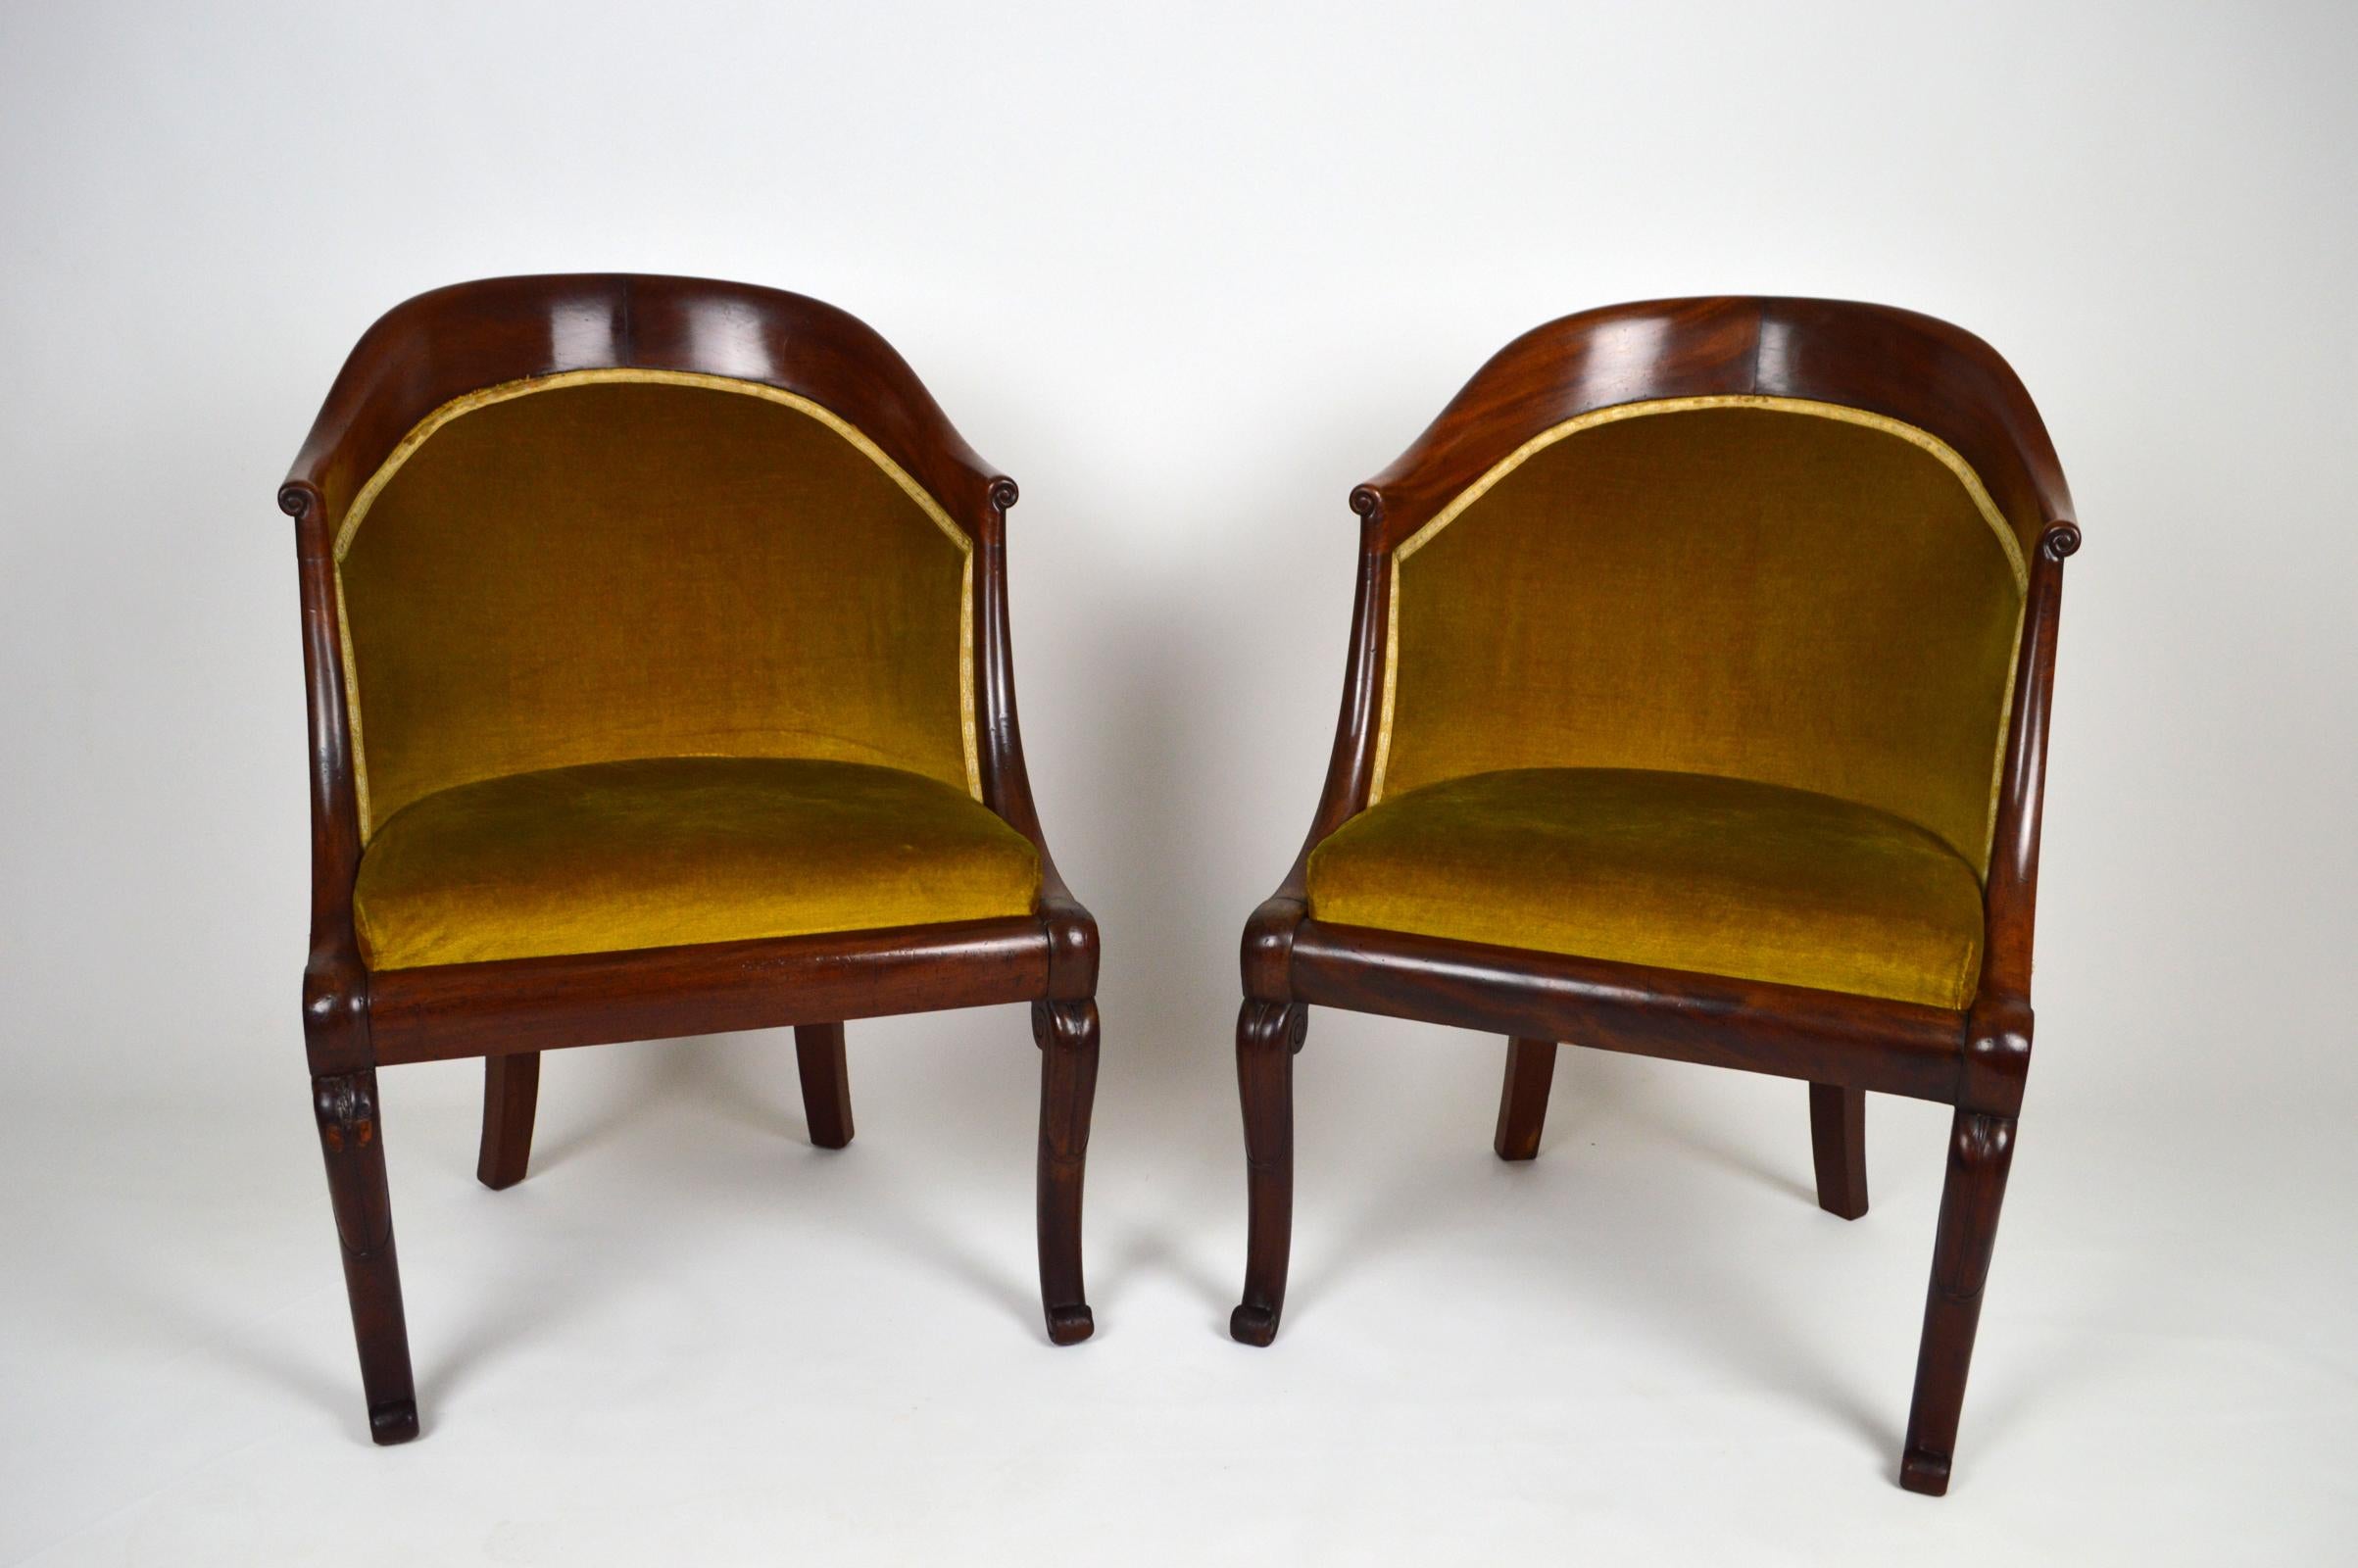 French Restauration period (1815-1830) pair of armchairs / tub chairs / bergères gondoles.
In solid and veneered mahogany.
France, circa 1820.

Good general condition.
Fabric in used condition. Padding of seats in very good condition. Solid and